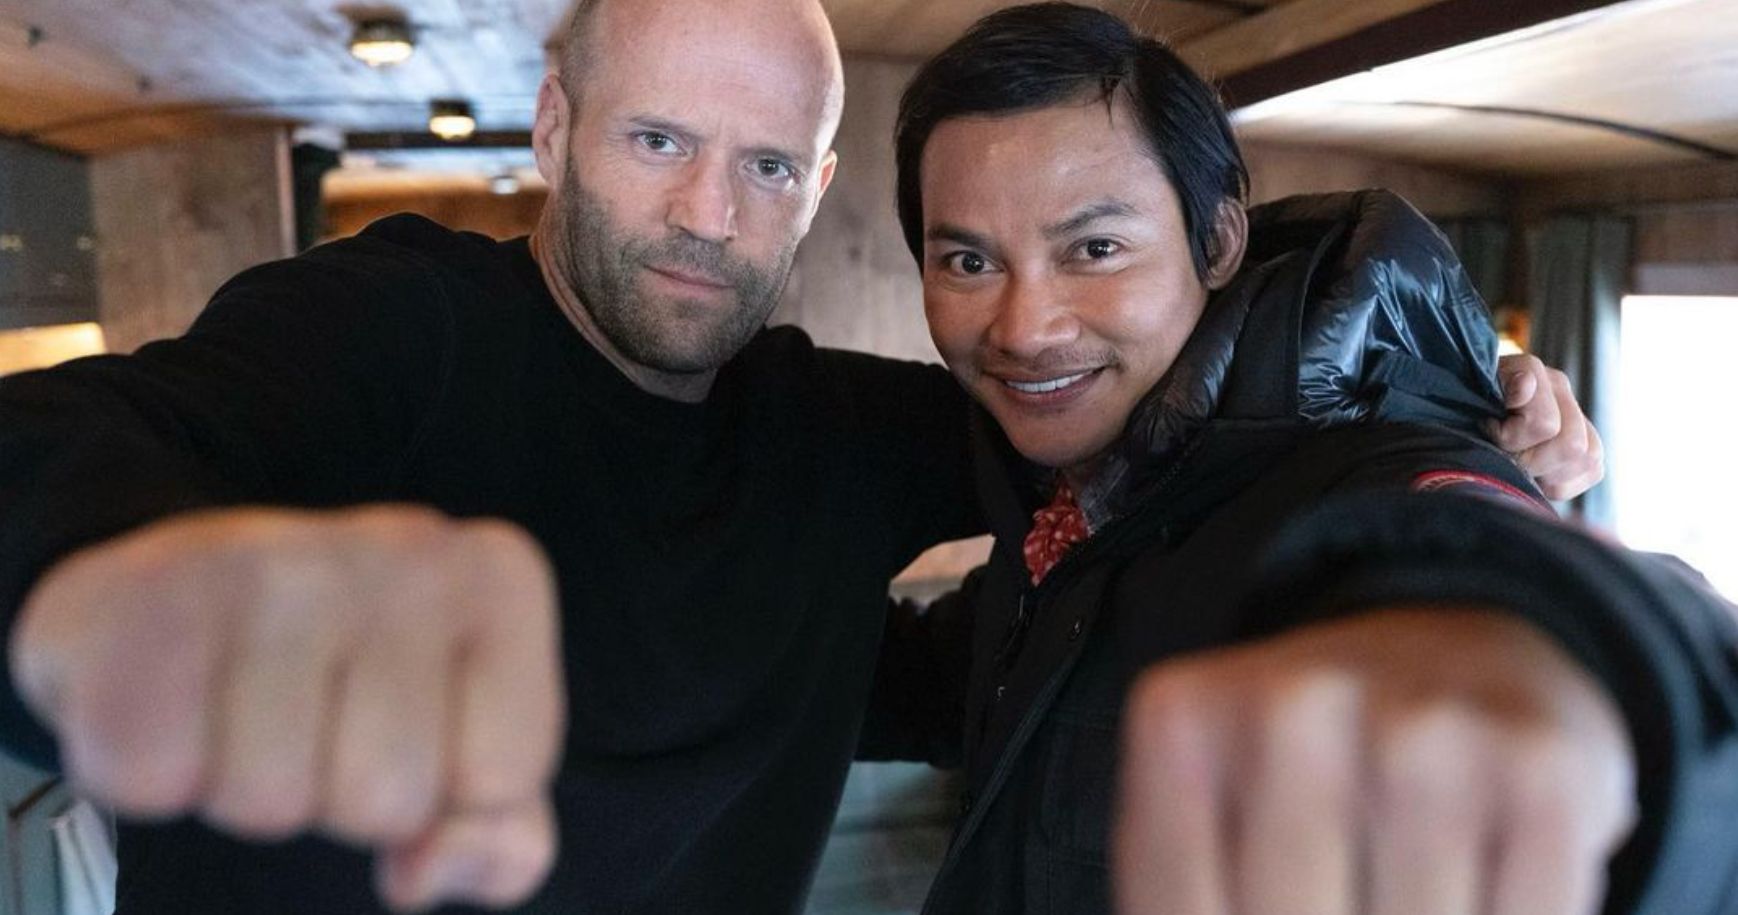 Tony Jaa and Jason Statham Throw Fists of Fury in New The Expendables 4 Set Images